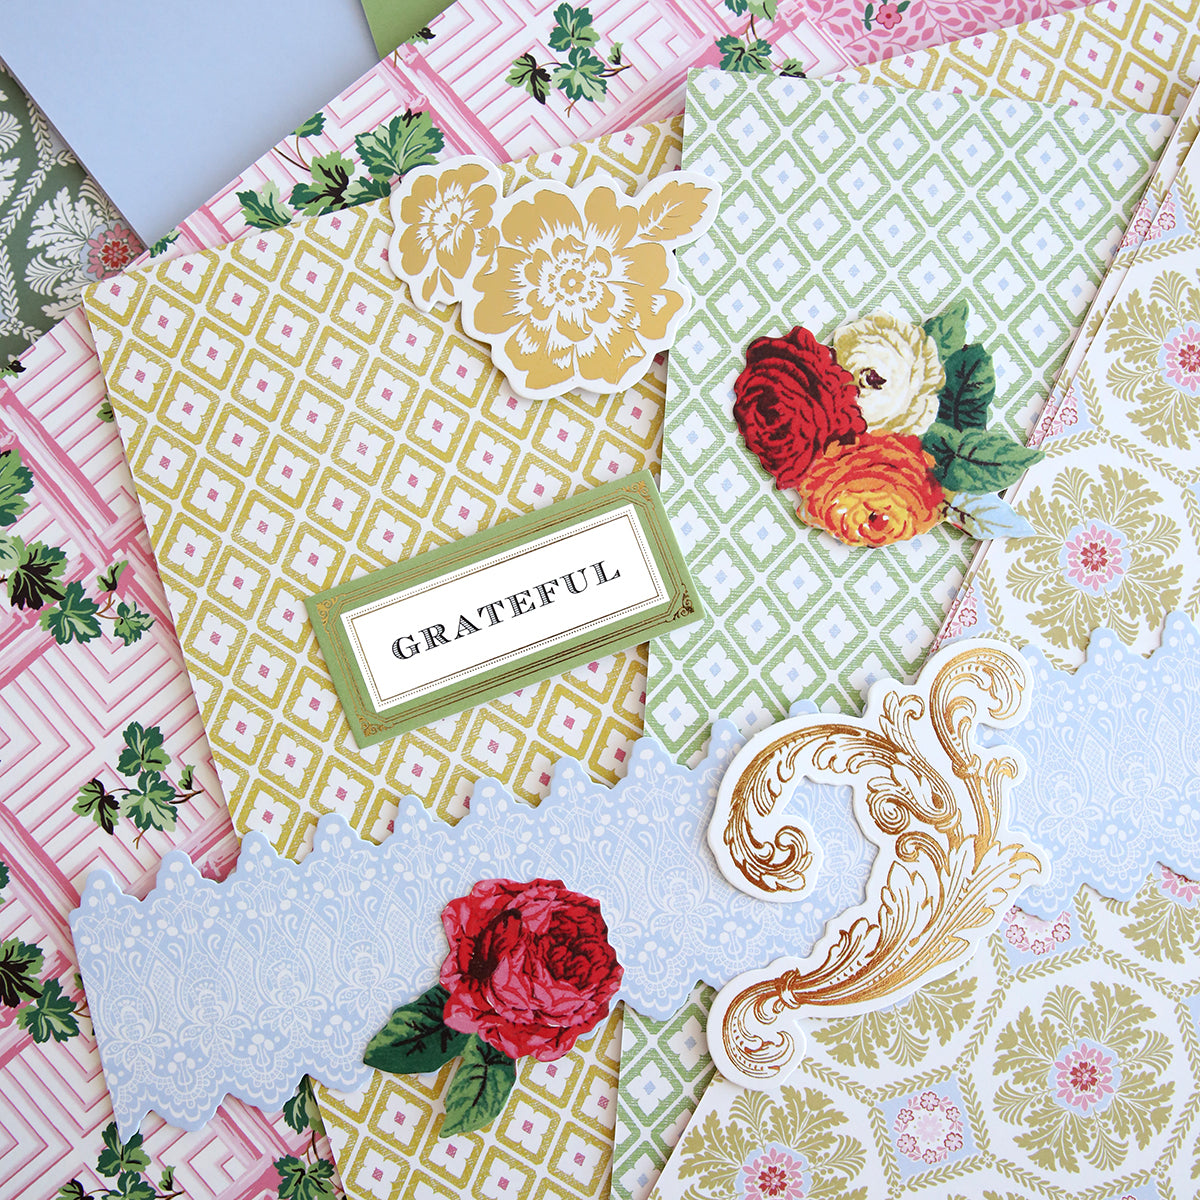 A pile of papers adorned with Annalise 12x12 Cardstock and Embellishments, including roses and flowers.